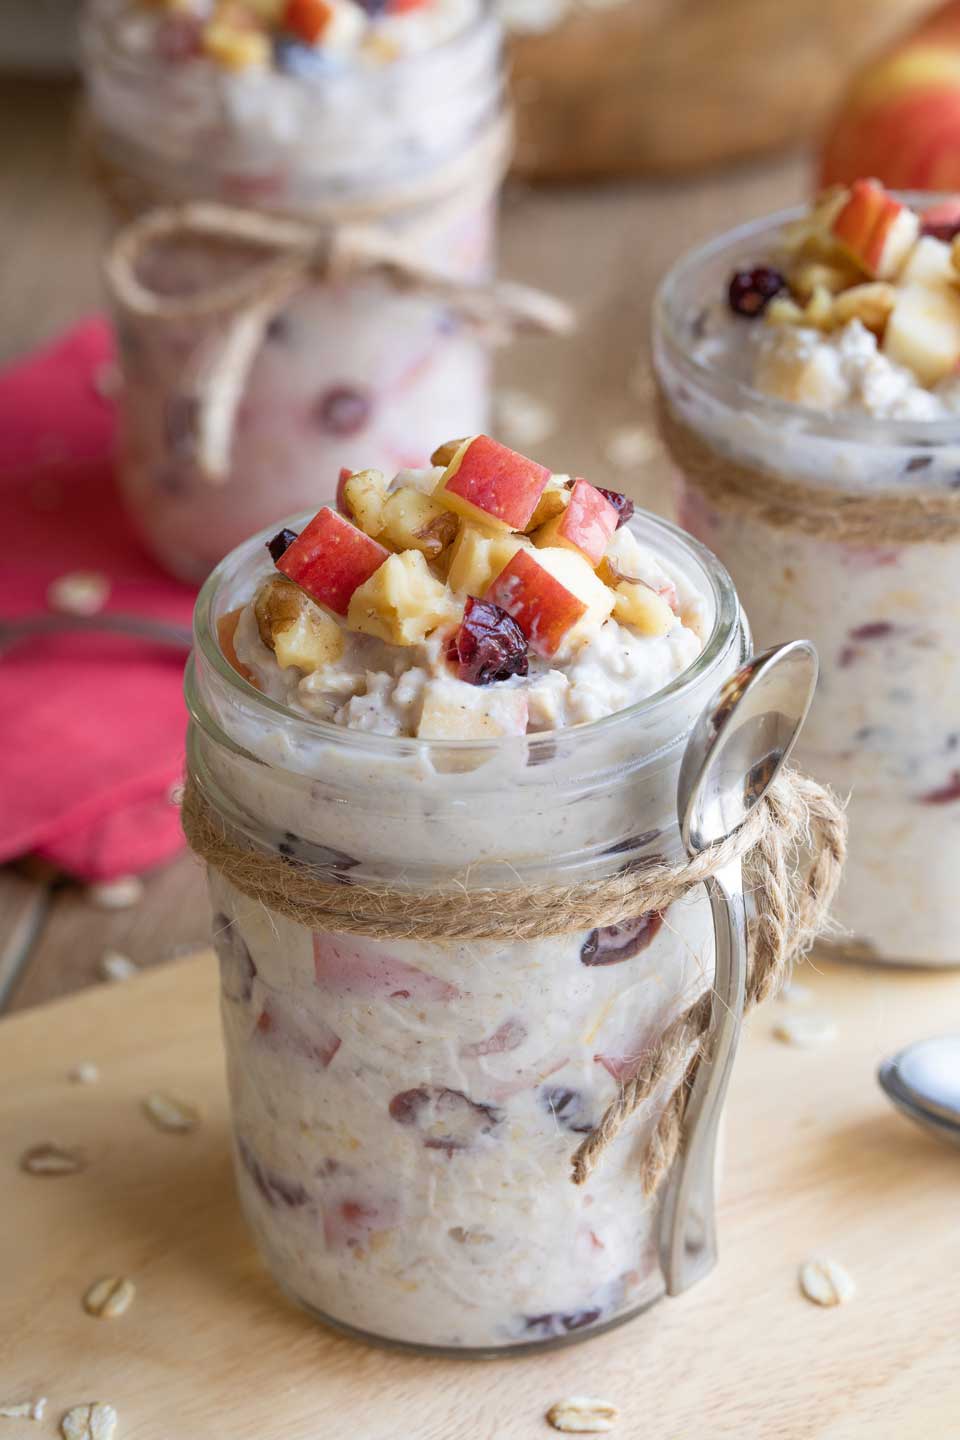 Side view of the Overnight Oats in jars, with a disposable spoon tied on and extra apple toppings.